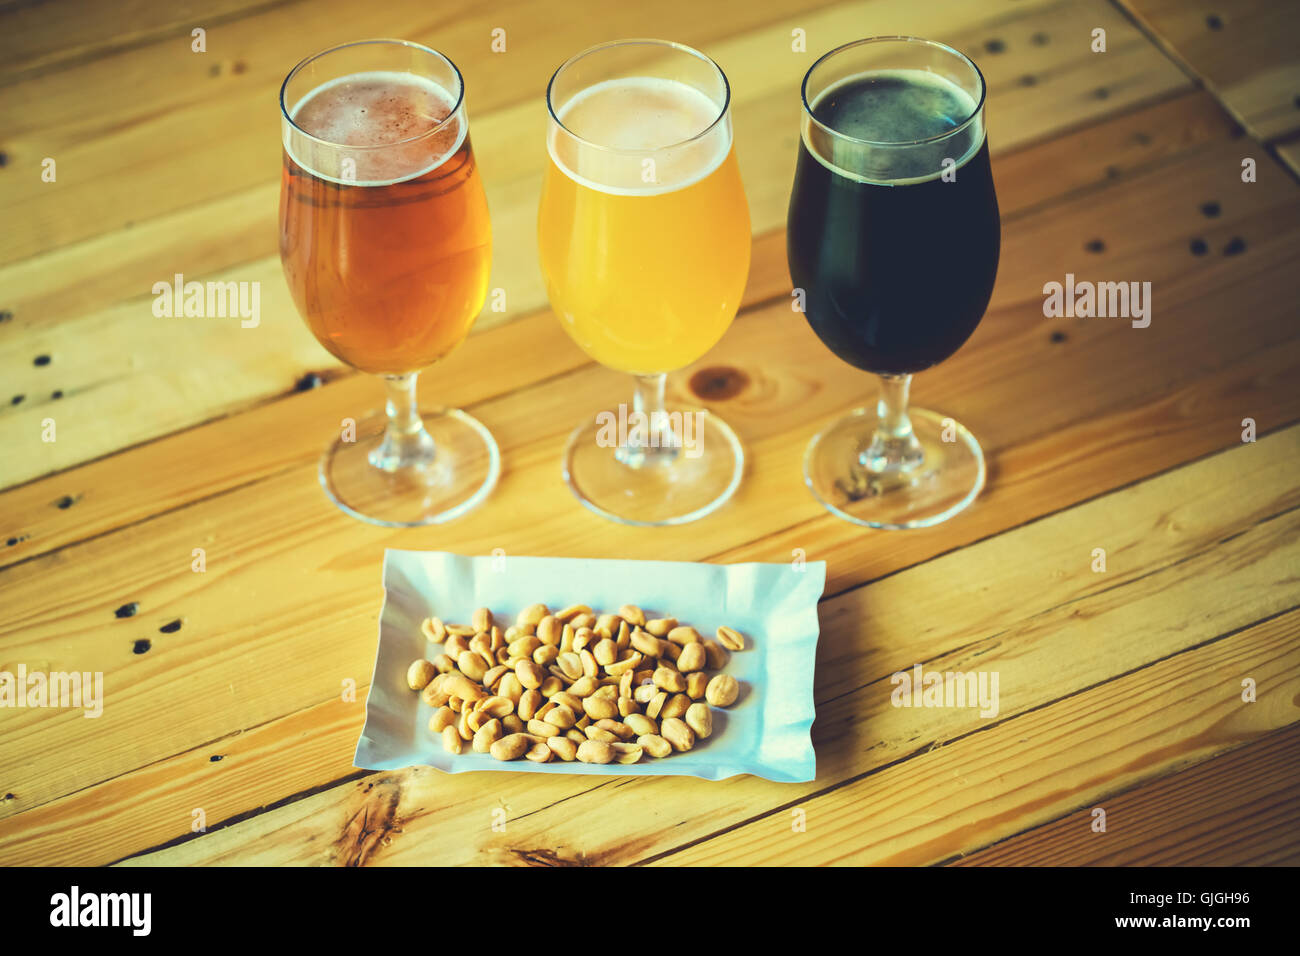 Beautiful background of the Oktoberfest. Glasses of cold fresh white, light and dark beer with peanut nuts on the wooden bar cou Stock Photo